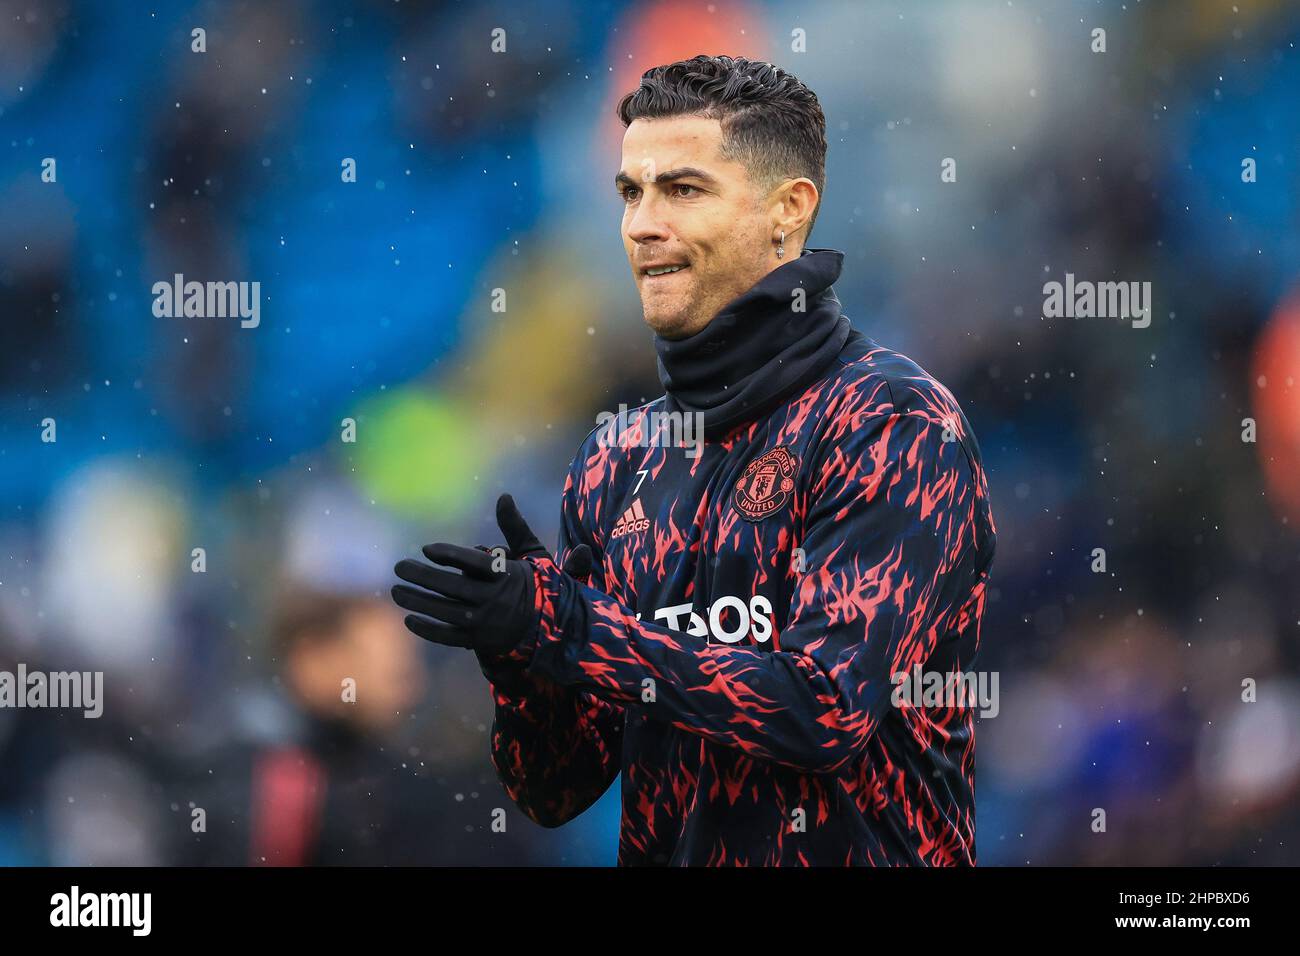 Cristiano Ronaldo #7 of Manchester United rubs his hands during the pre-game warmup in ,  on 2/20/2022. (Photo by Mark Cosgrove/News Images/Sipa USA) Stock Photo